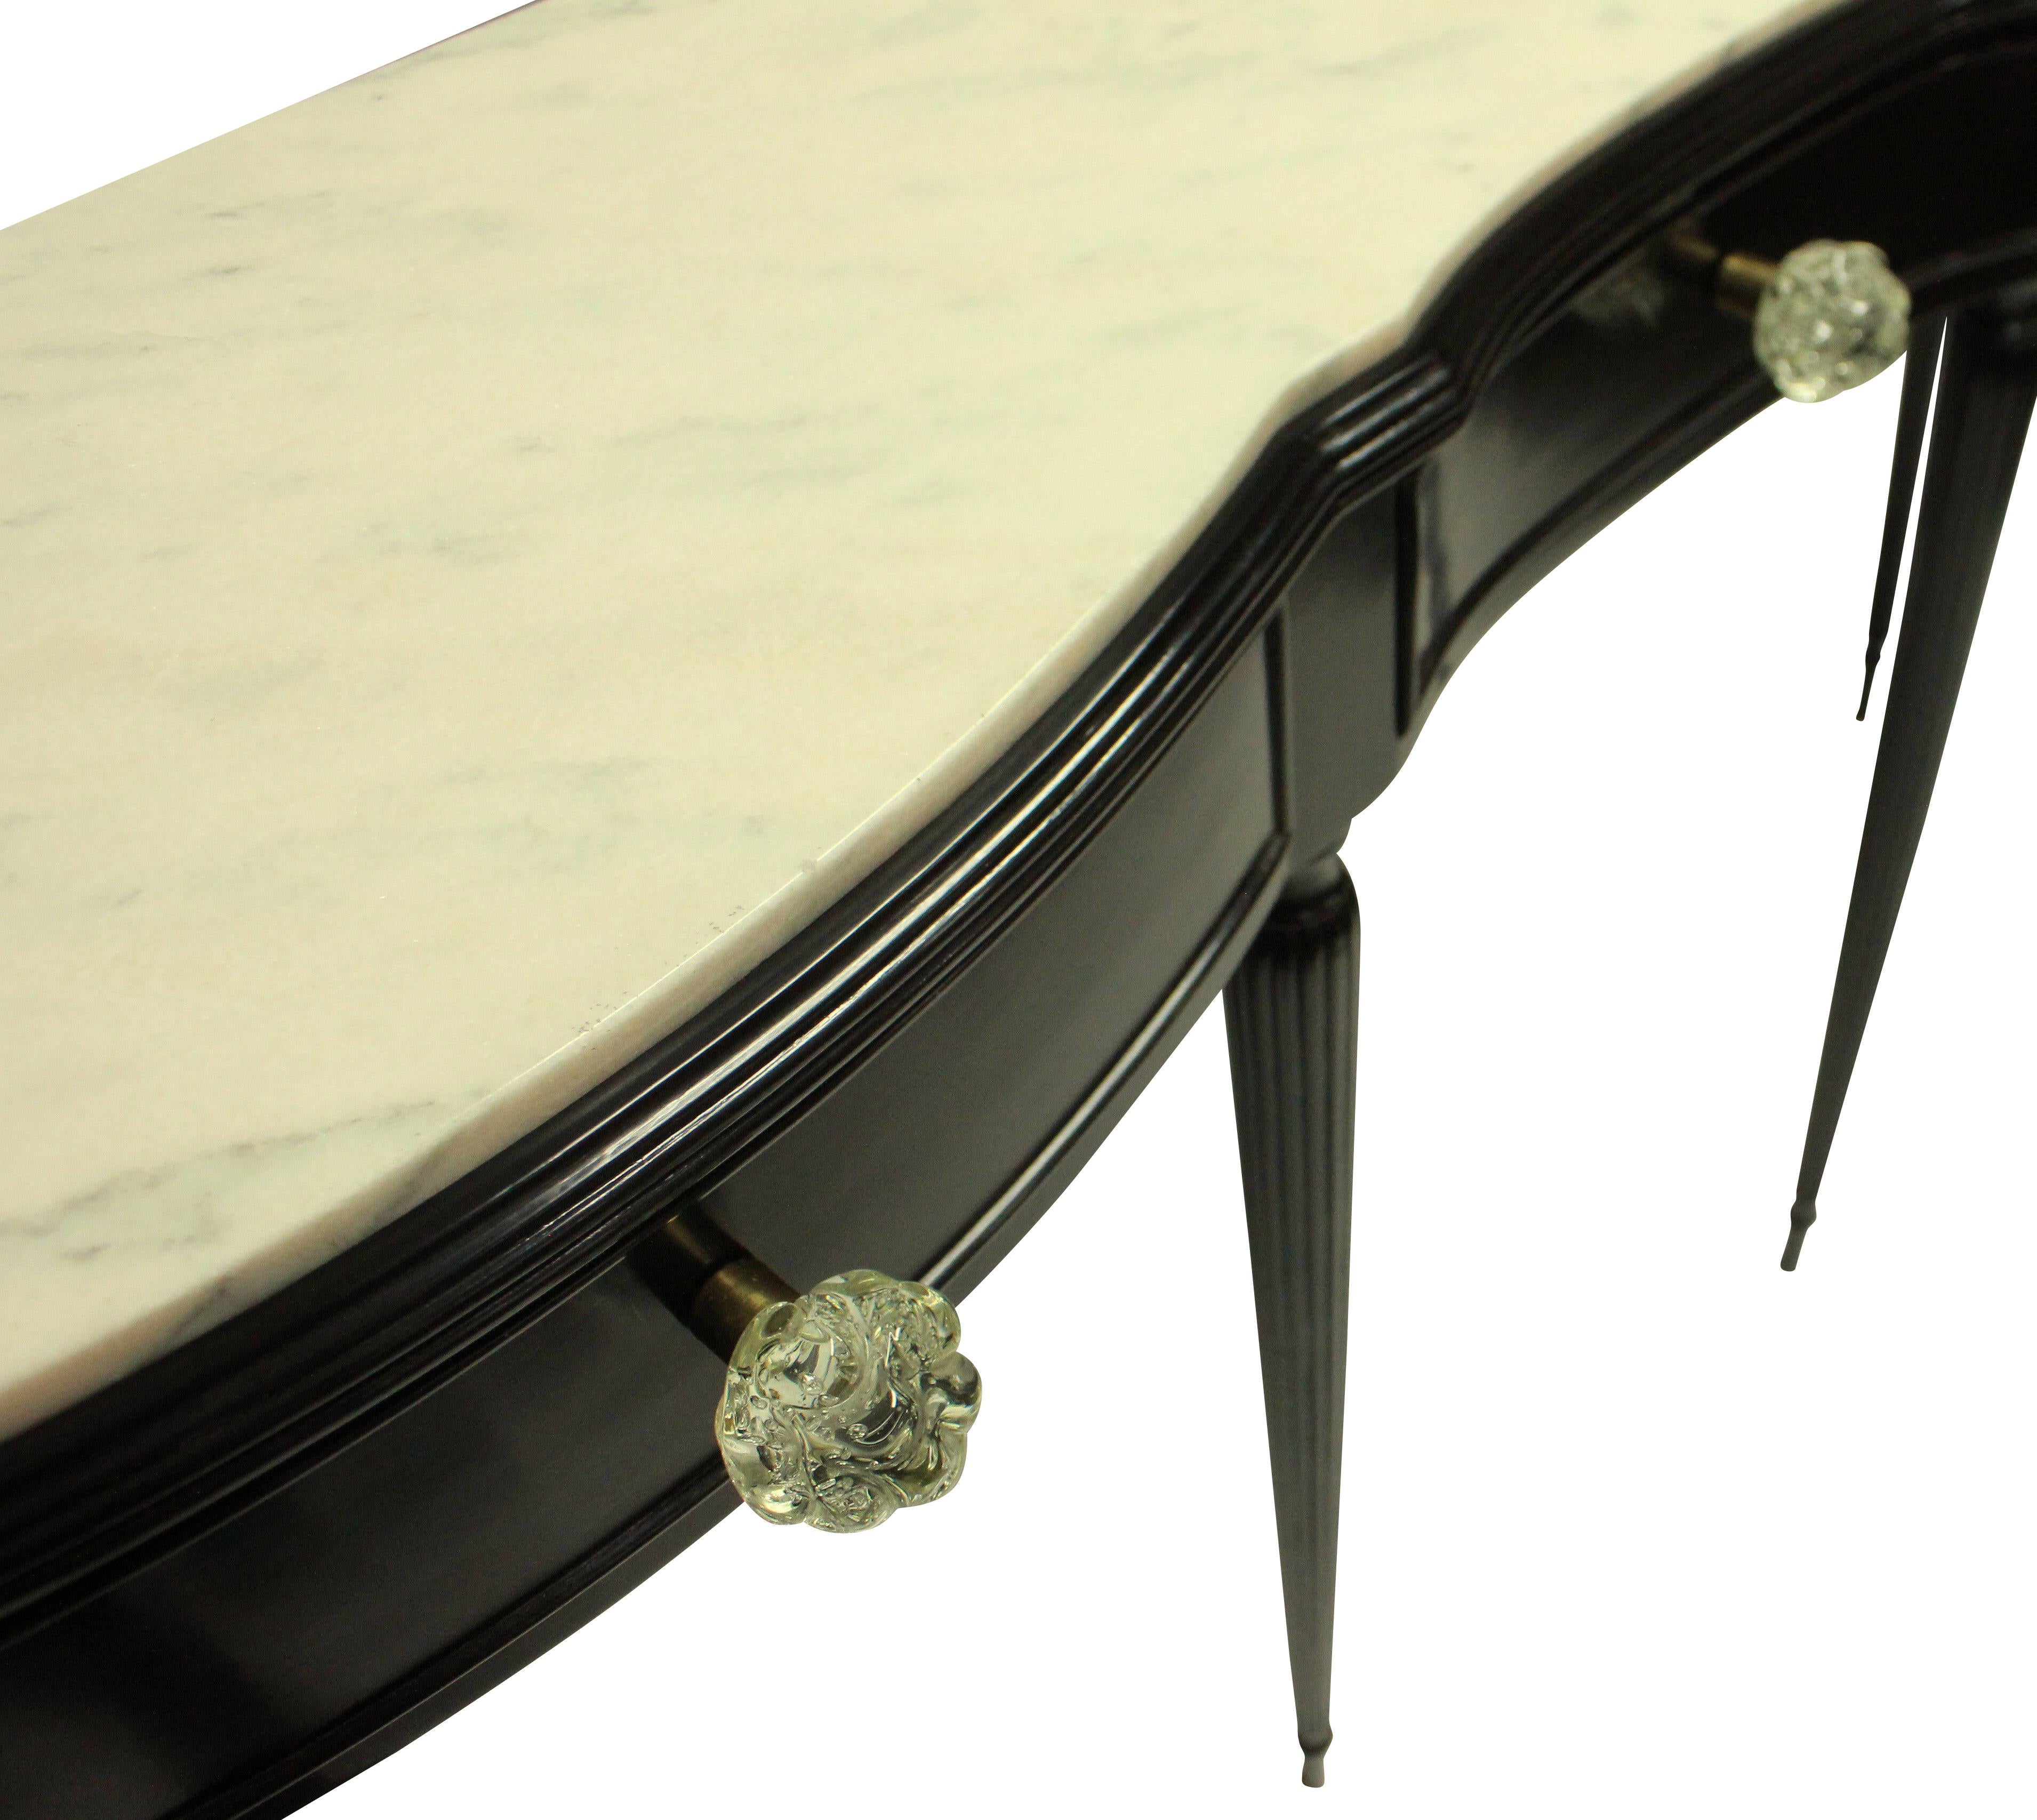 A large Italian midcentury ebonized console table with a serpentine shape upon tapering fluted legs. The three drawers have beautiful hand blown handles, full of air bubbles and the top has a cream inset marble top.